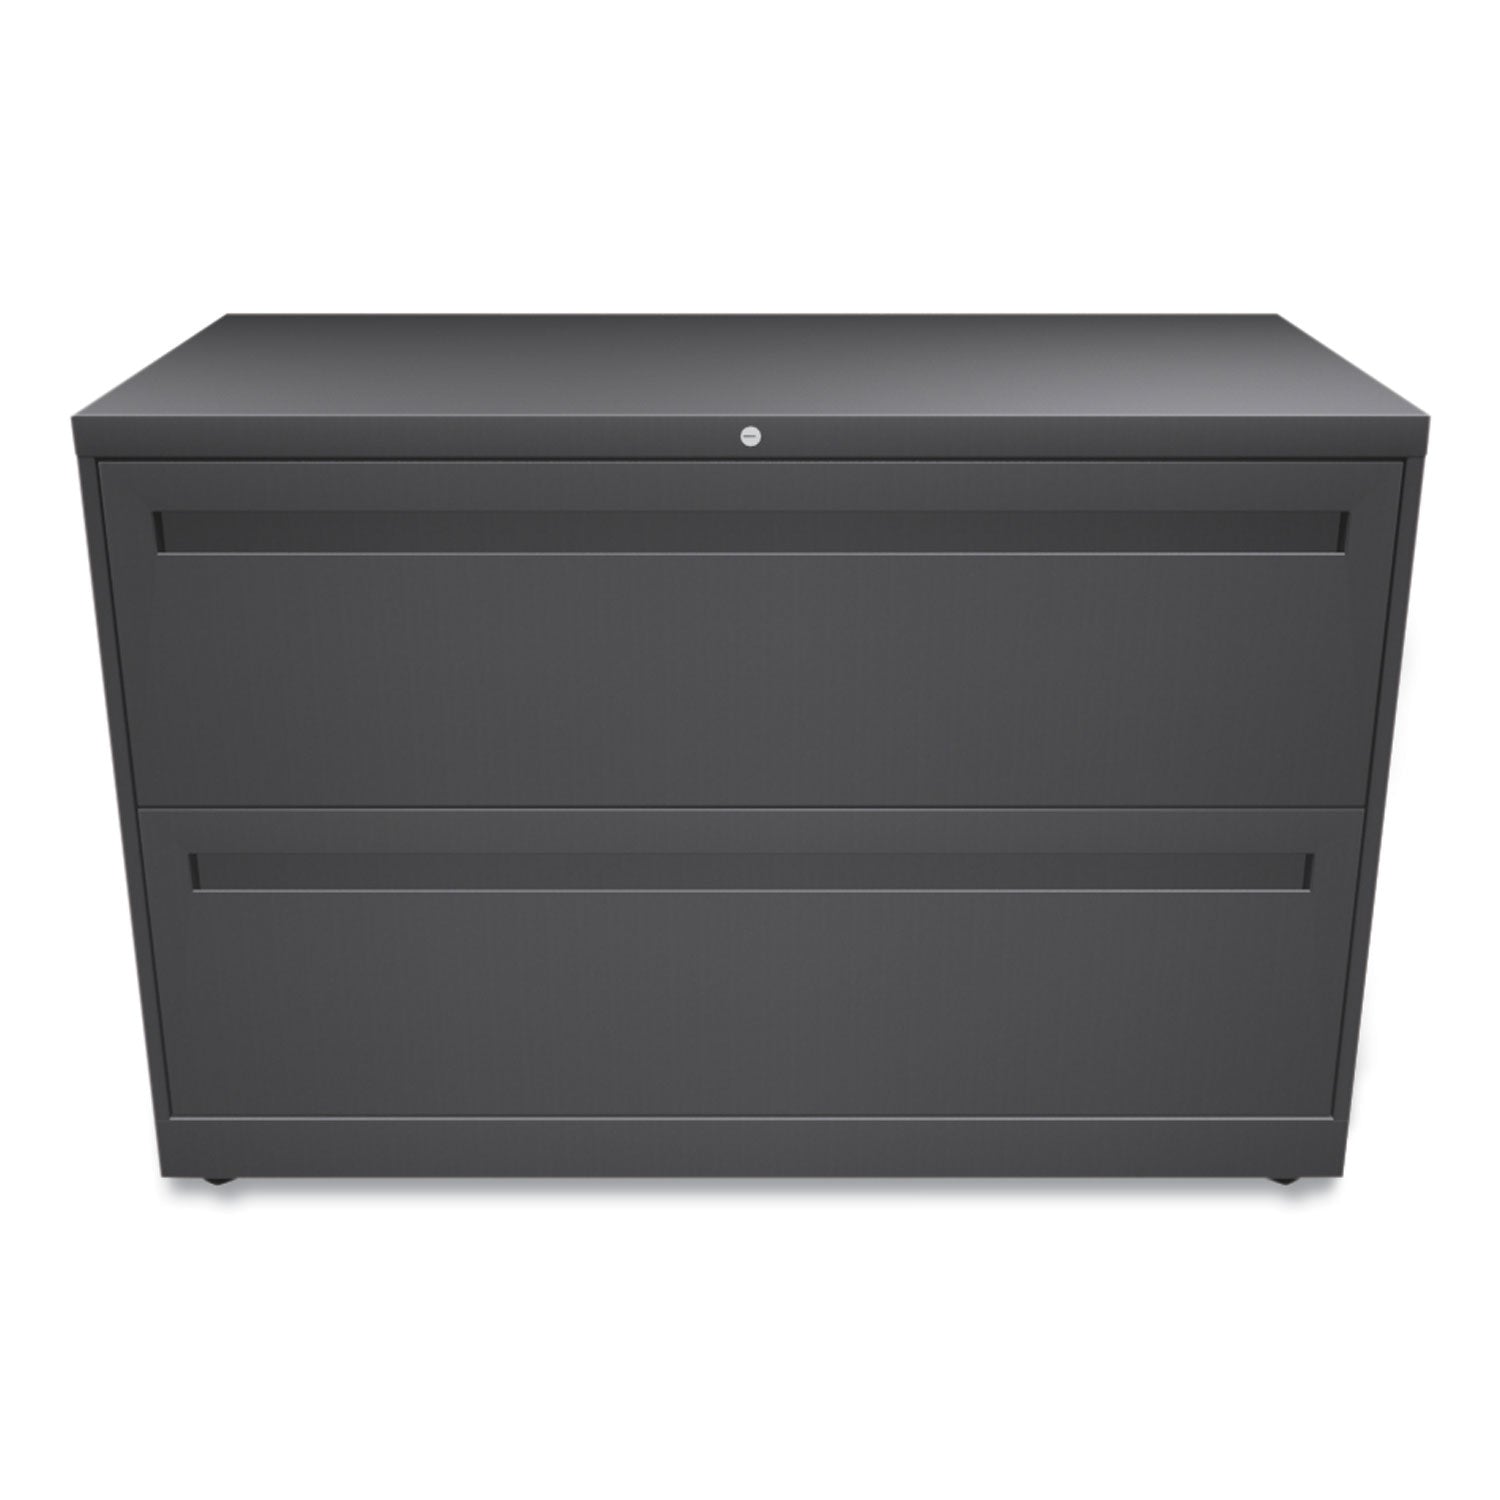 Brigade 700 Series Lateral File, 2 Legal/Letter-Size File Drawers, Charcoal, 42" x 18" x 28 - 